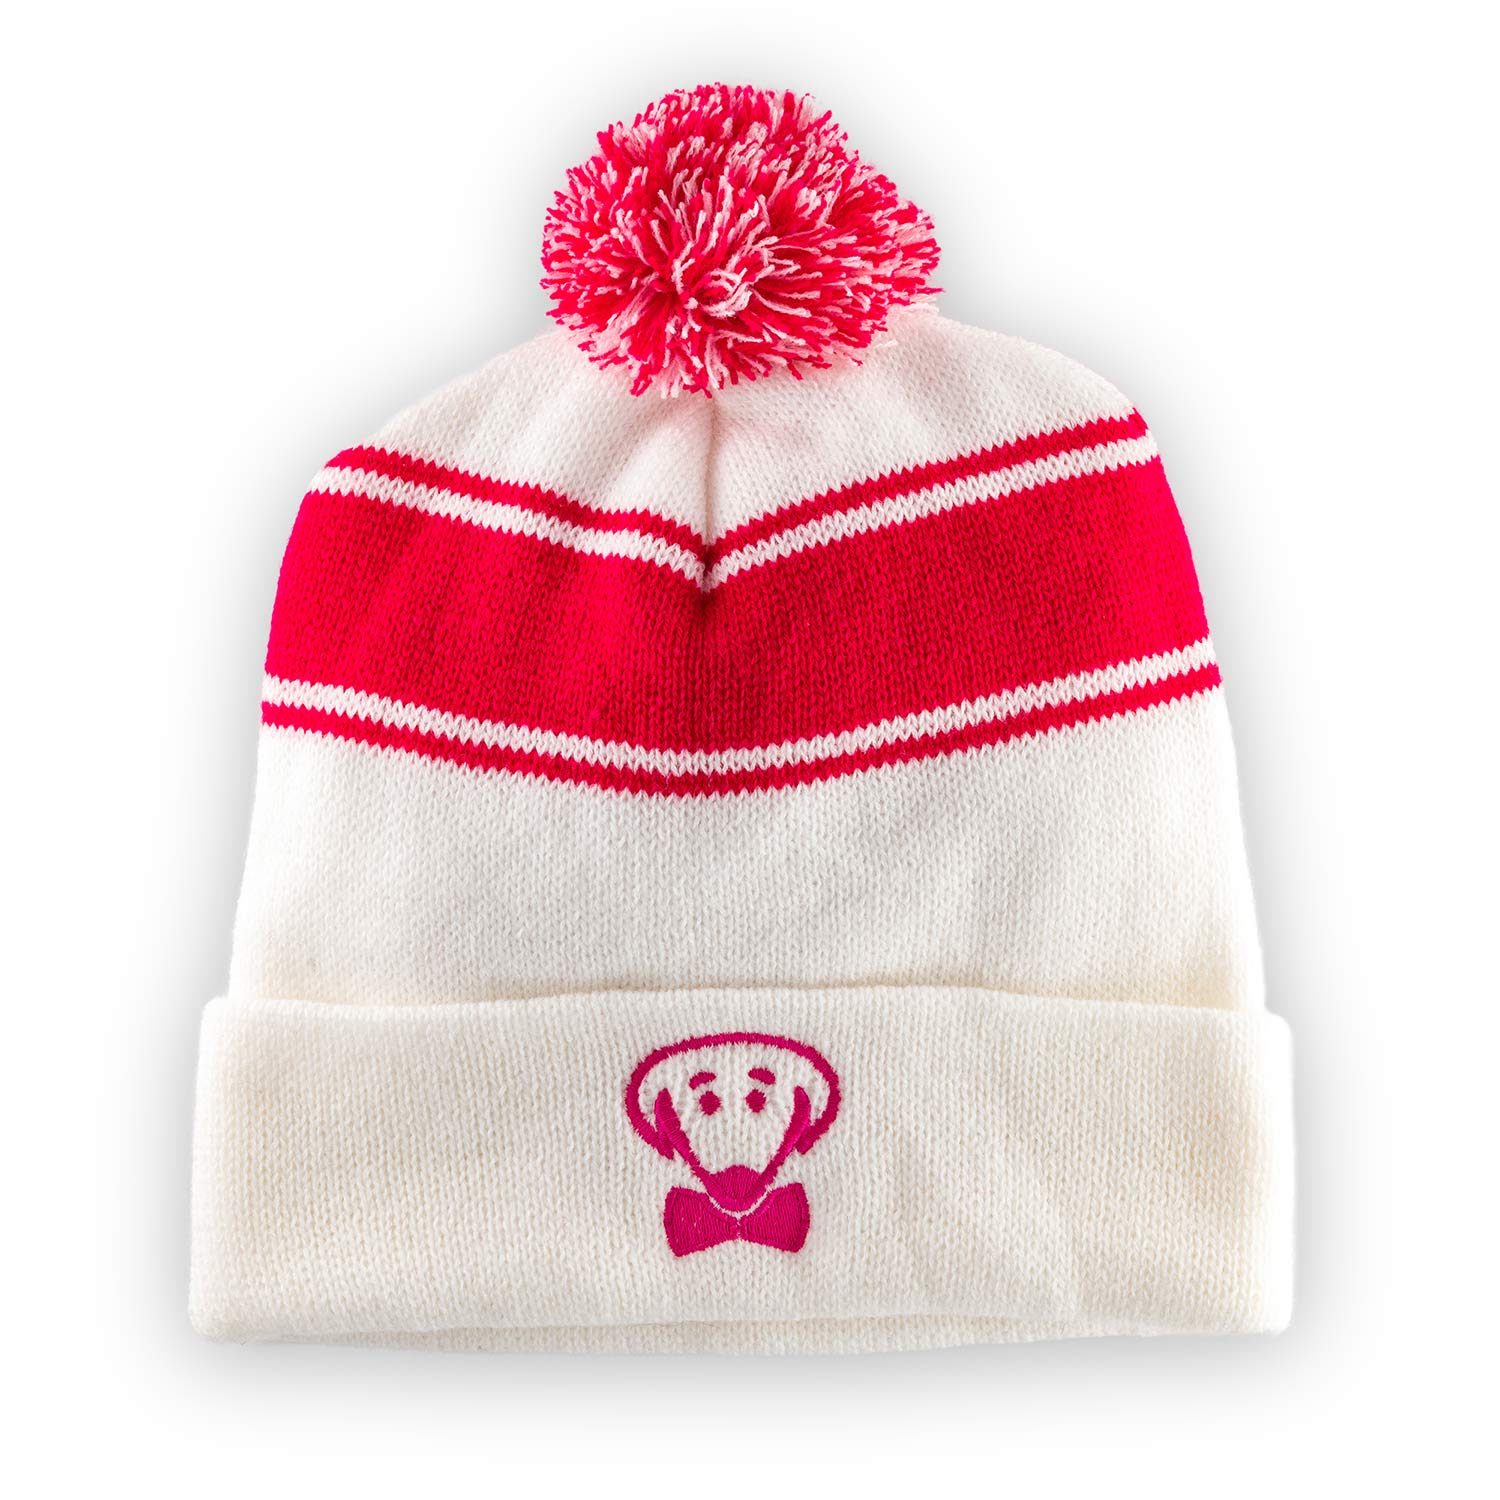 Olsen winter knit hat with pom in white and pink raspberry by Beau Tyler